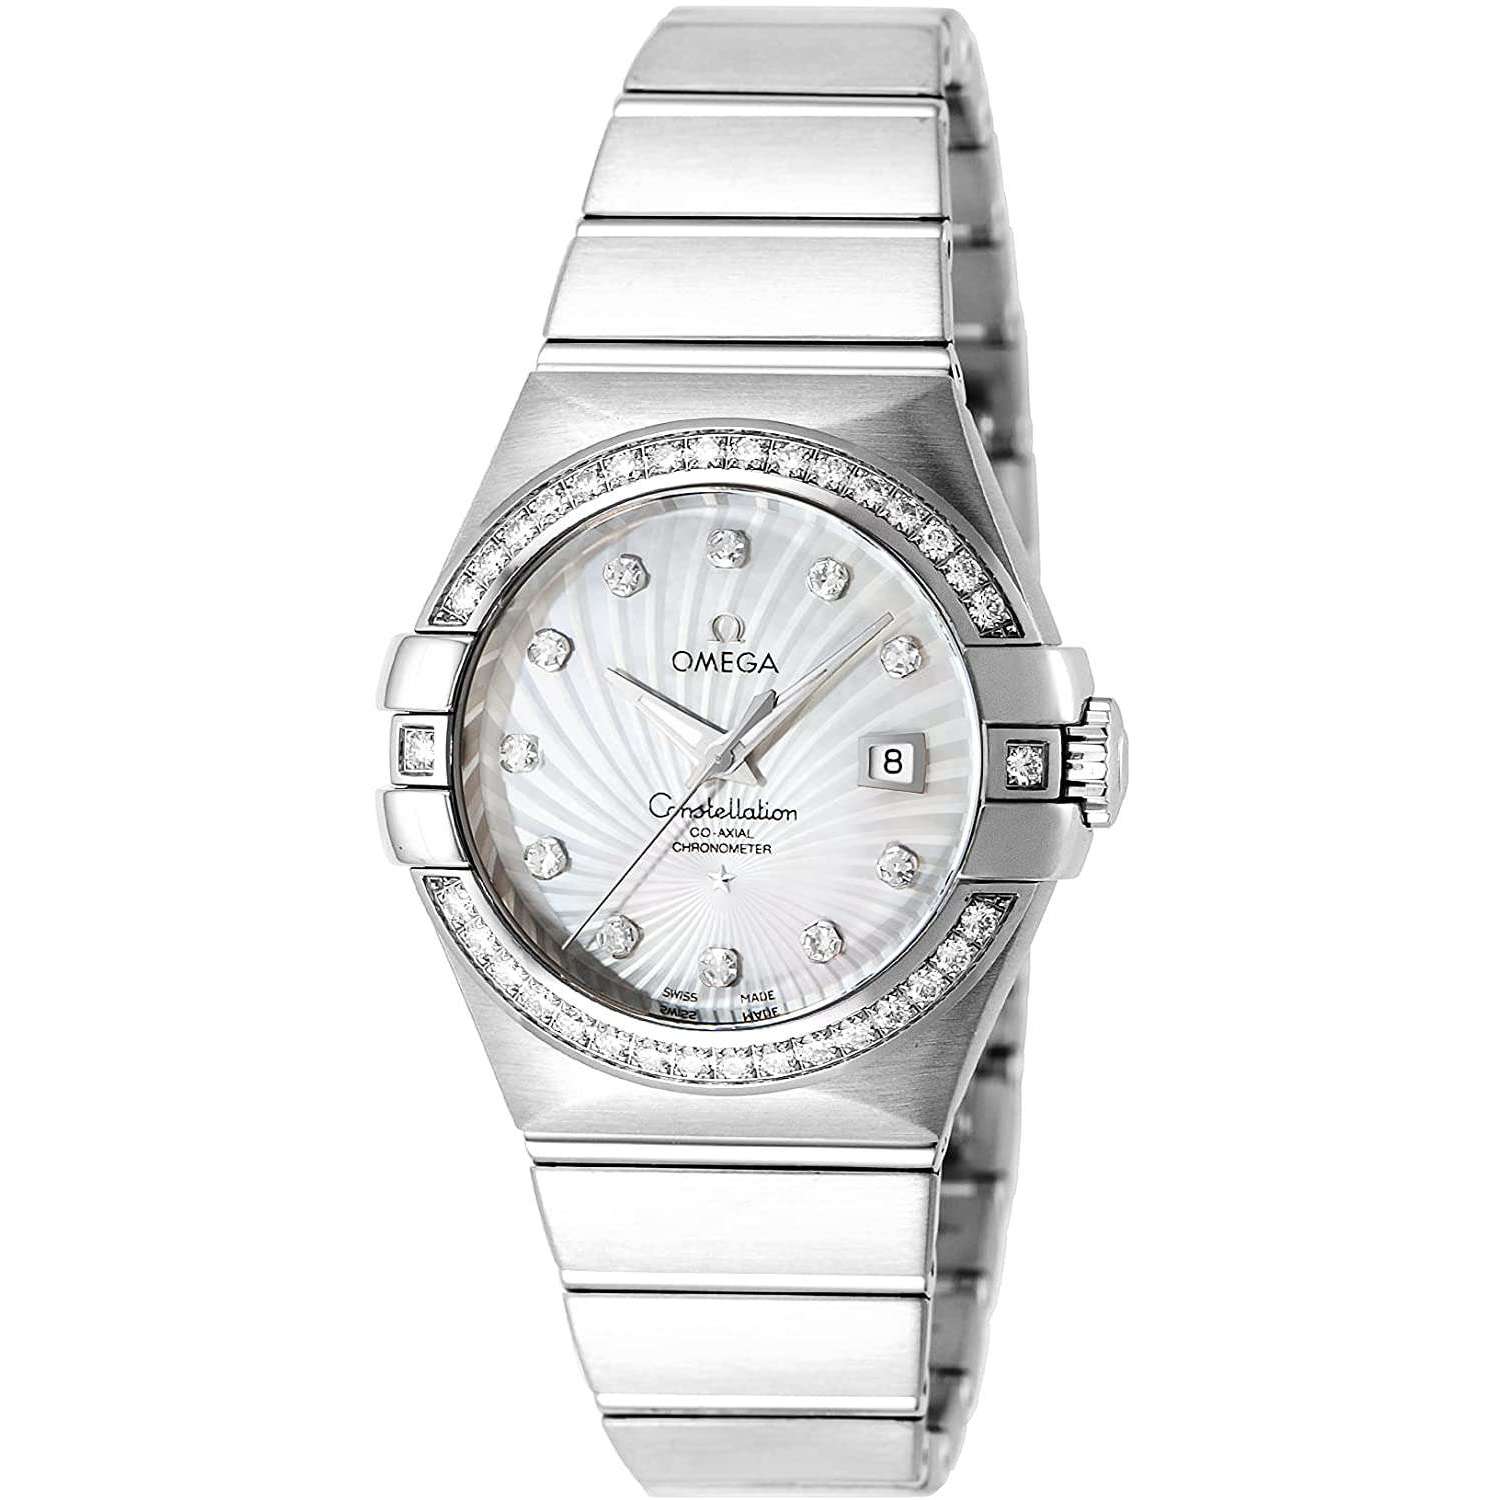 ROOK JAPAN:OMEGA CONSTELLATION CO-AXIAL CHRONOMETER 31 MM WOMEN WATCH 123.55.31.20.55.003,Luxury Watch,Omega